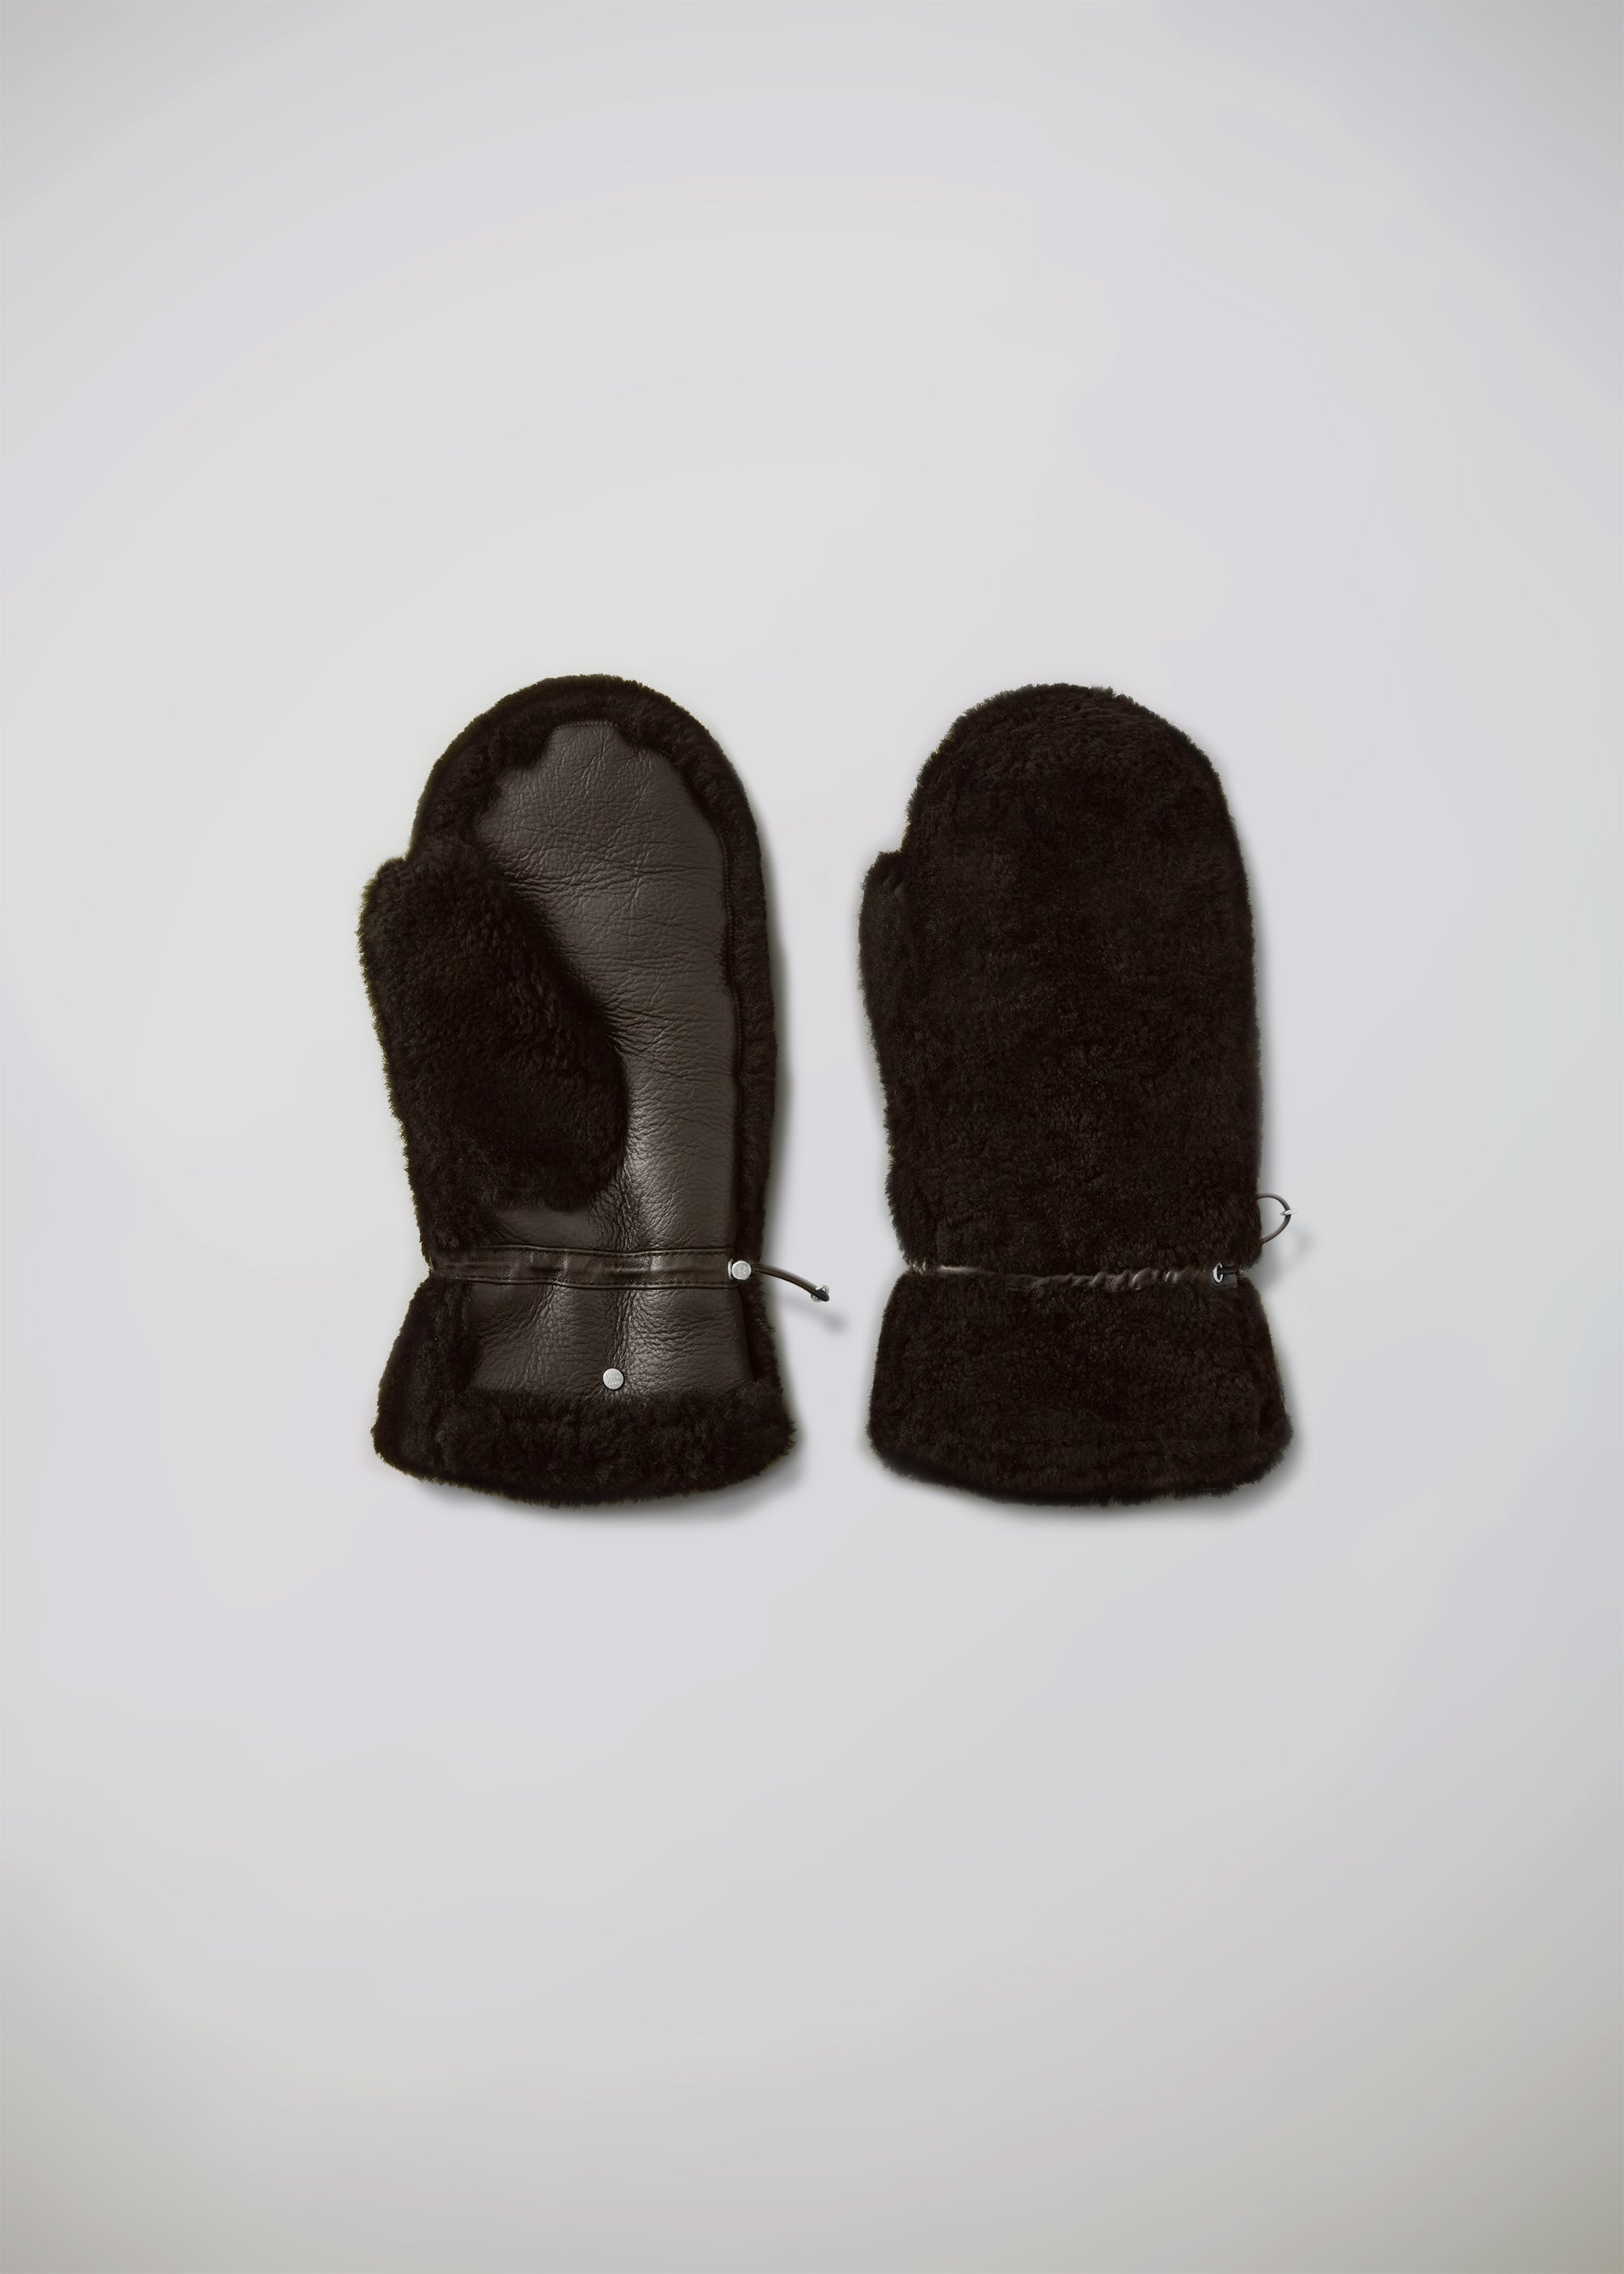 Shearling Mittens Past Tense